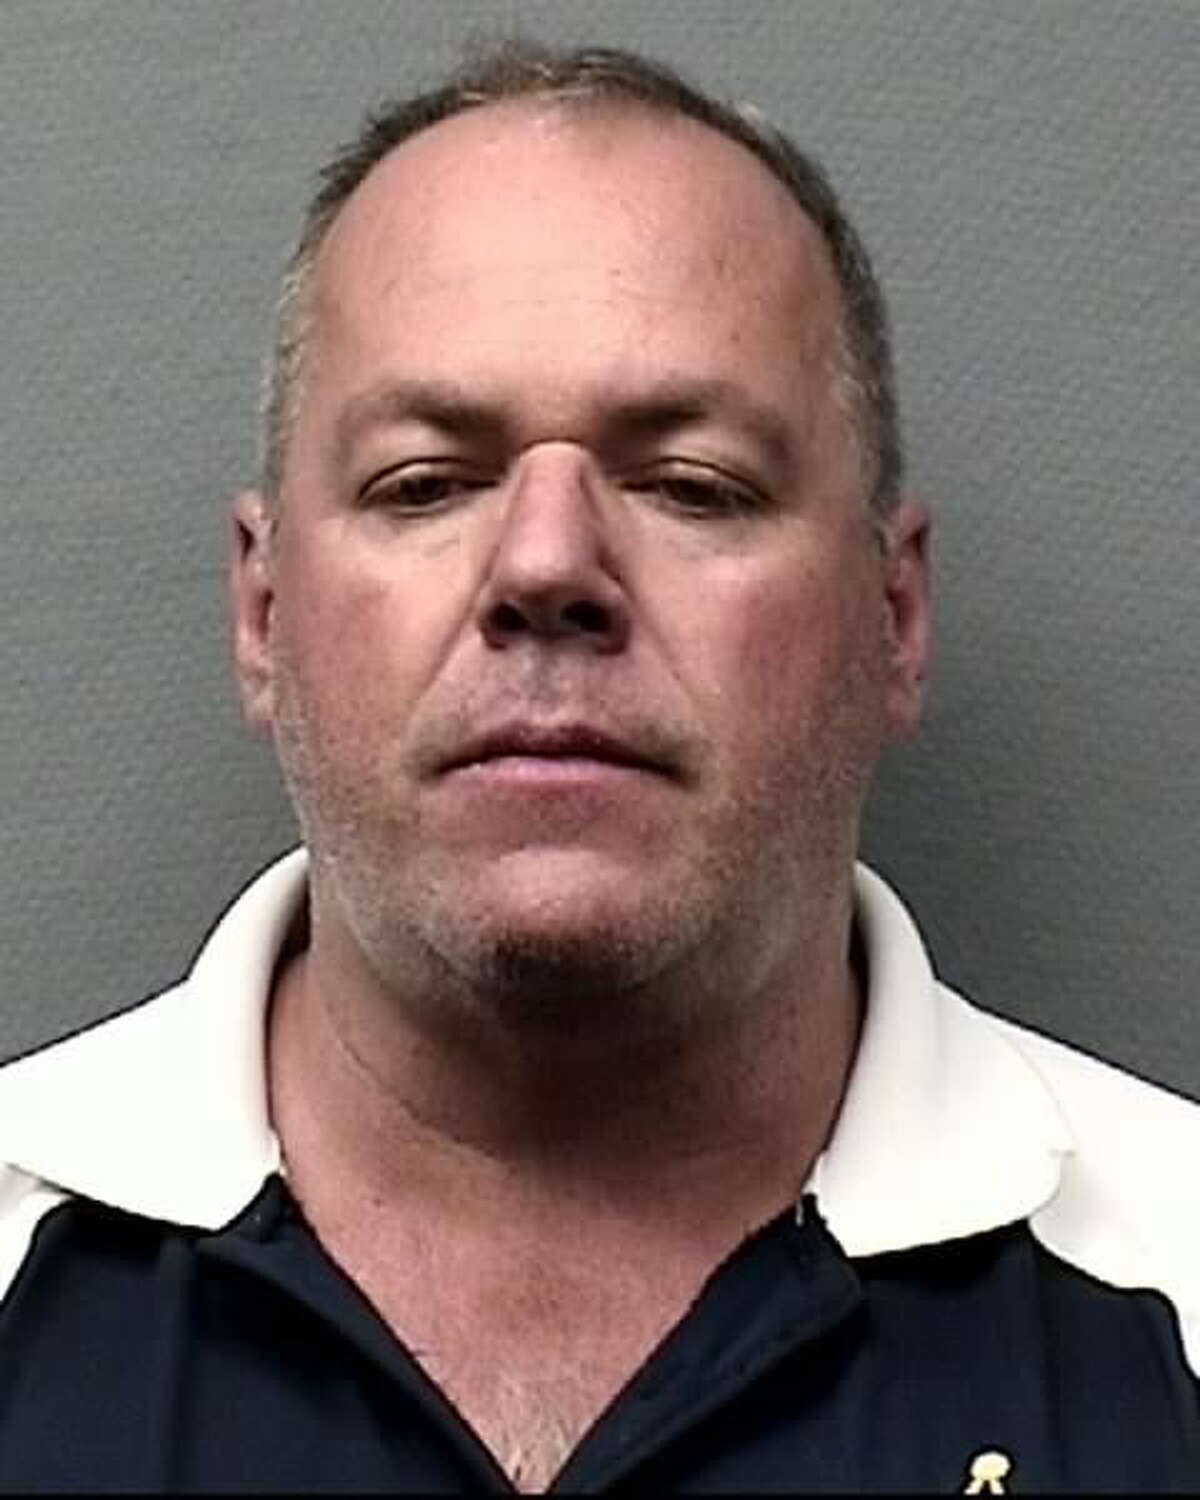 Bruce Wayne Wallis, 51, was charged with aggravated promotion of prostitution and engaging in criminal activity.